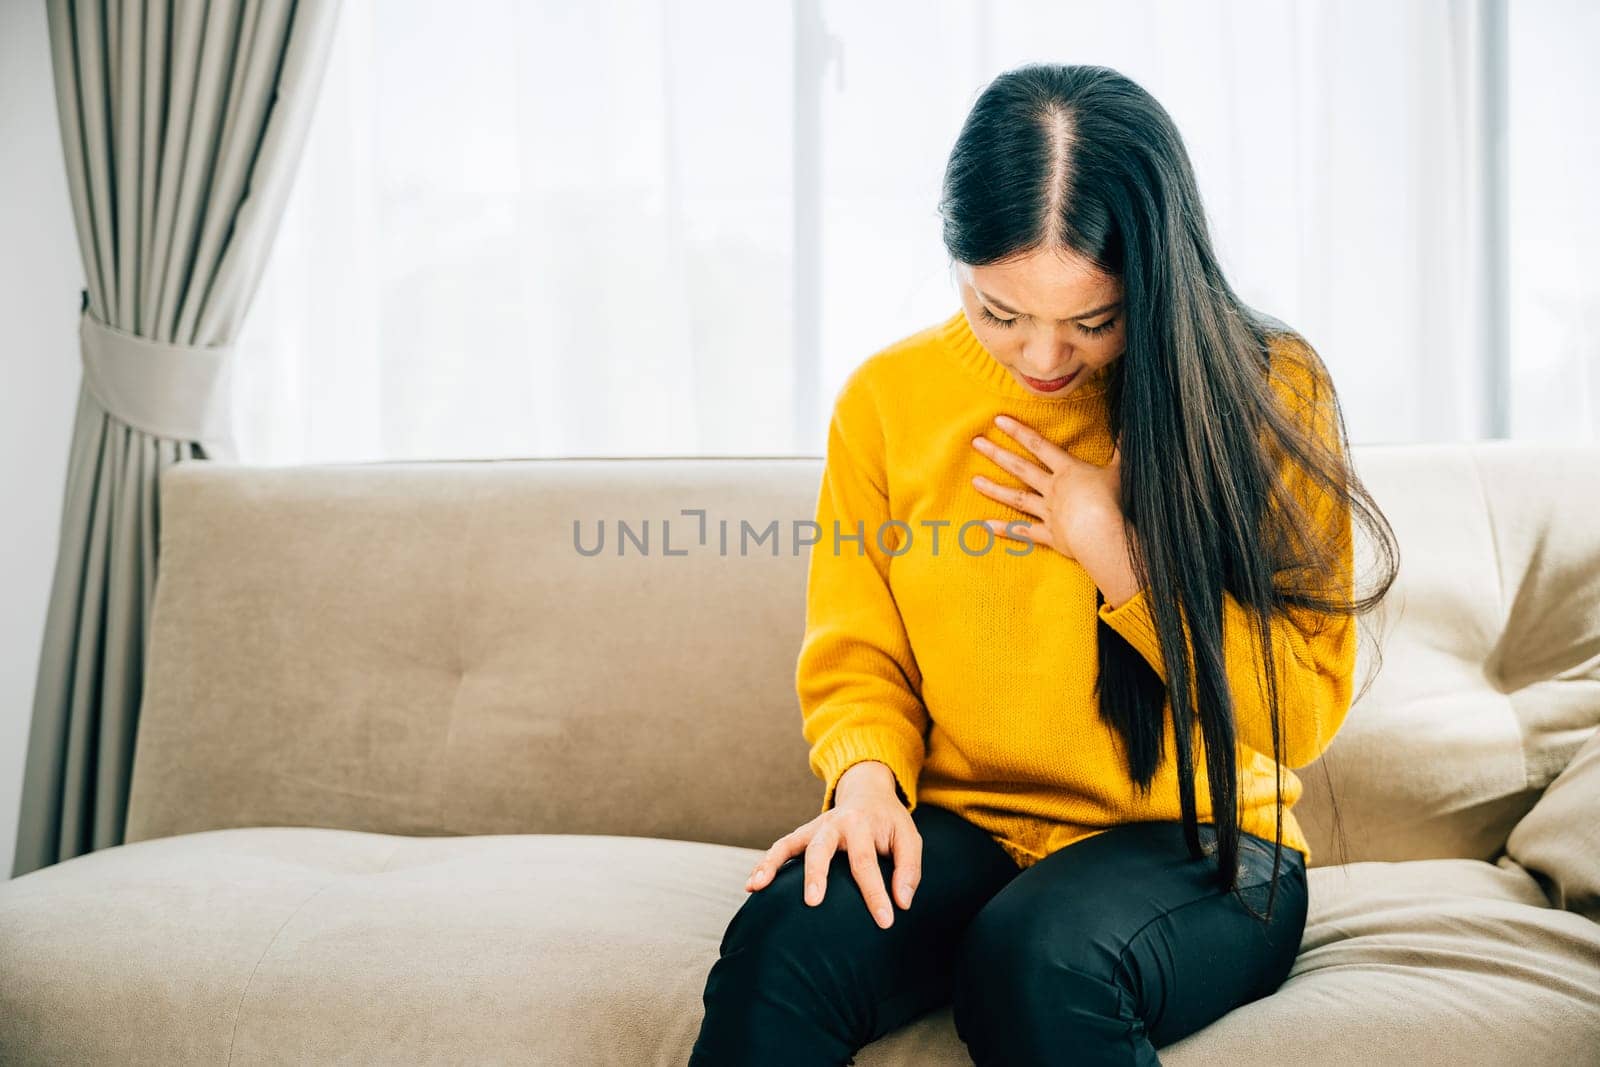 Portraying a heart attack, Asian woman on sofa holds her left chest in pain requiring immediate medical assistance. Illustrating heartache discomfort and the need for emergency aid.